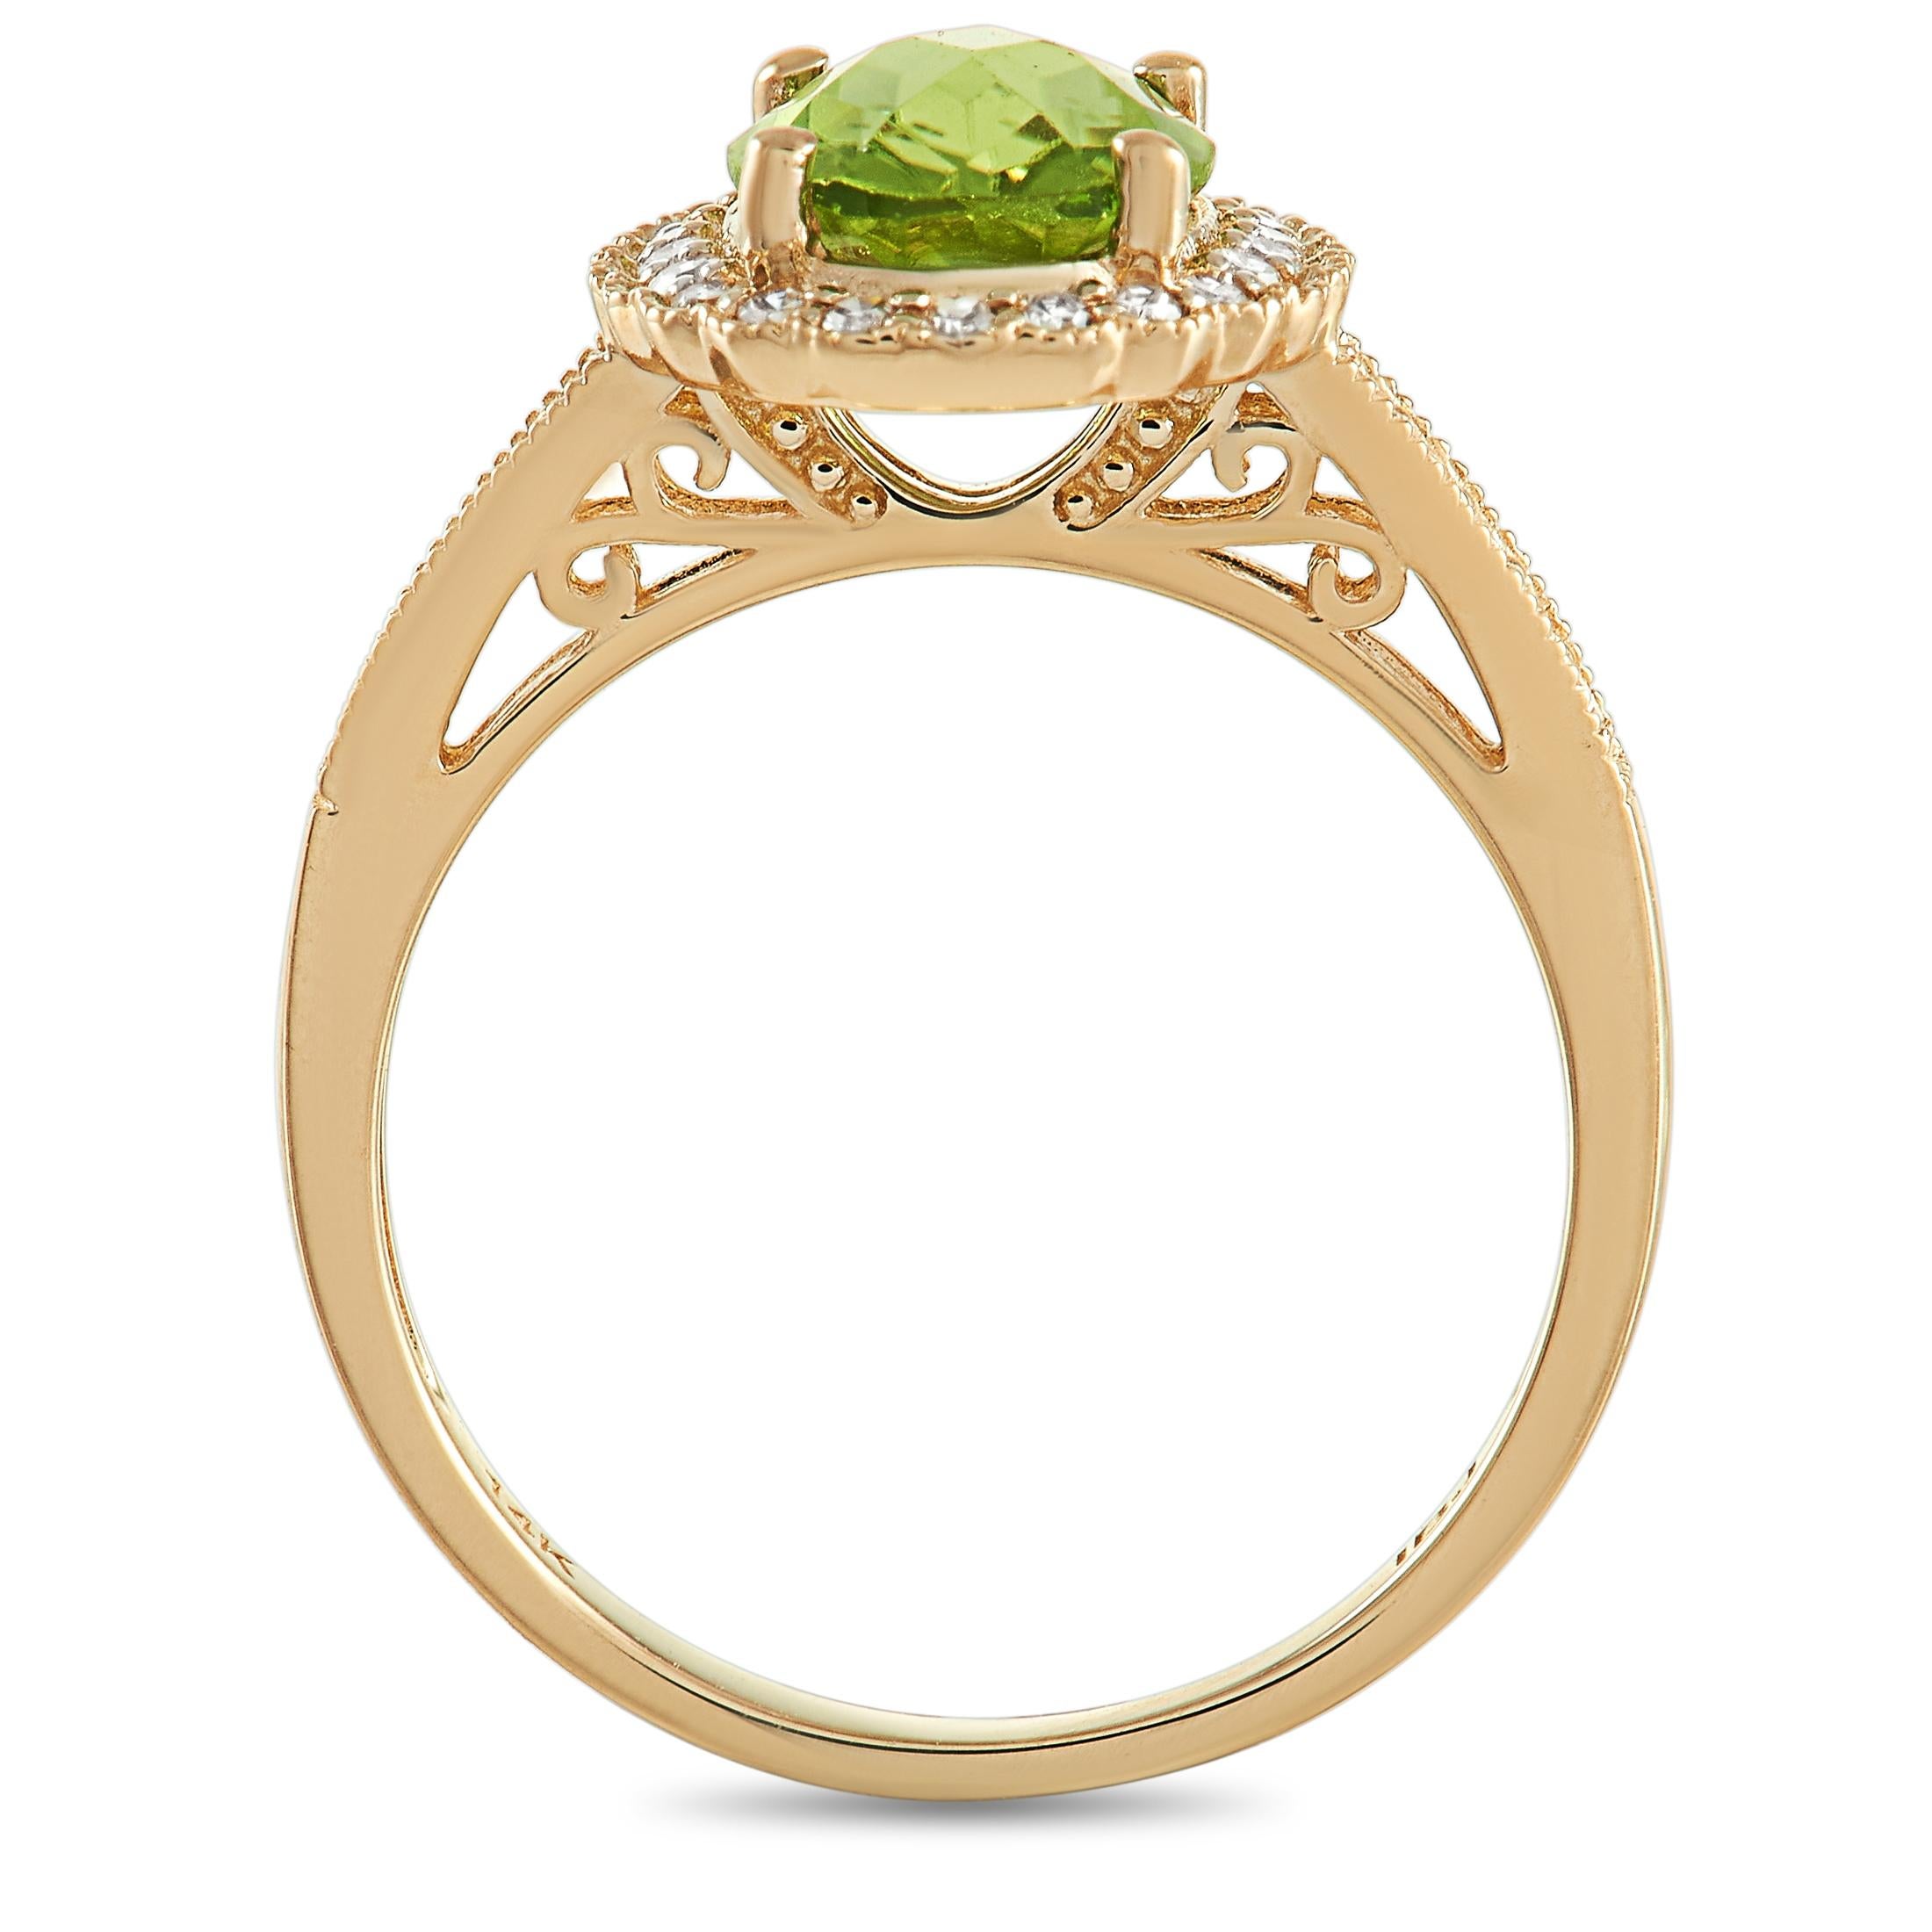 Exuding strength and balance is this LB Exclusive 14K Yellow Gold 0.25 ct Diamond and Peridot Cocktail Ring. Perched atop a yellow gold scallop frame that's lined with diamonds is an eye-catching faceted peridot gemstone with a subtly shimmering